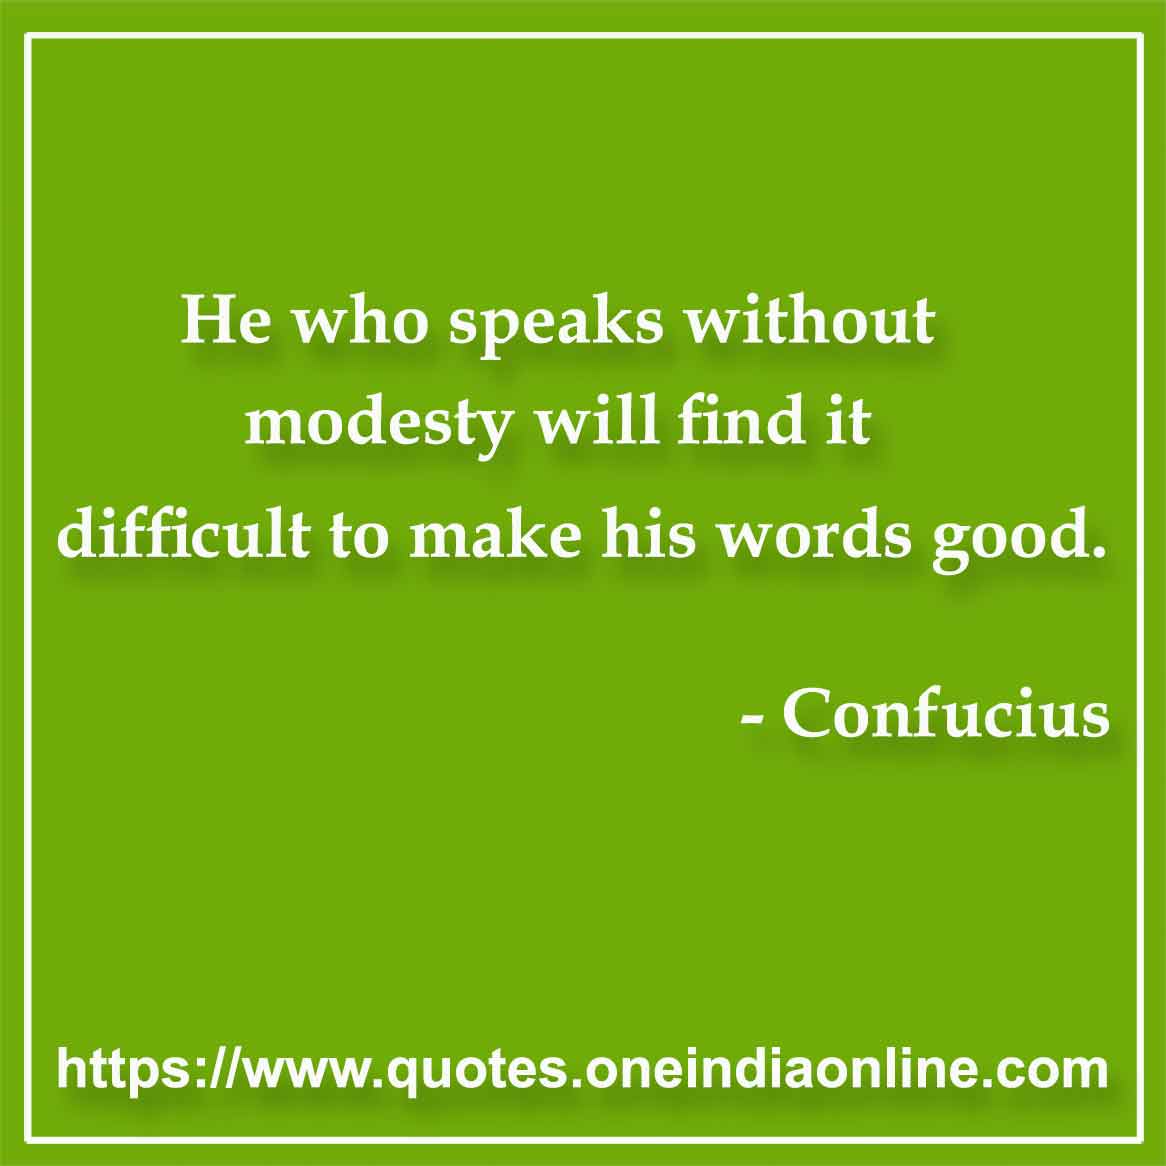 He who speaks without modesty will find it difficult to make his words good.

- Humility Quotes by Confucius